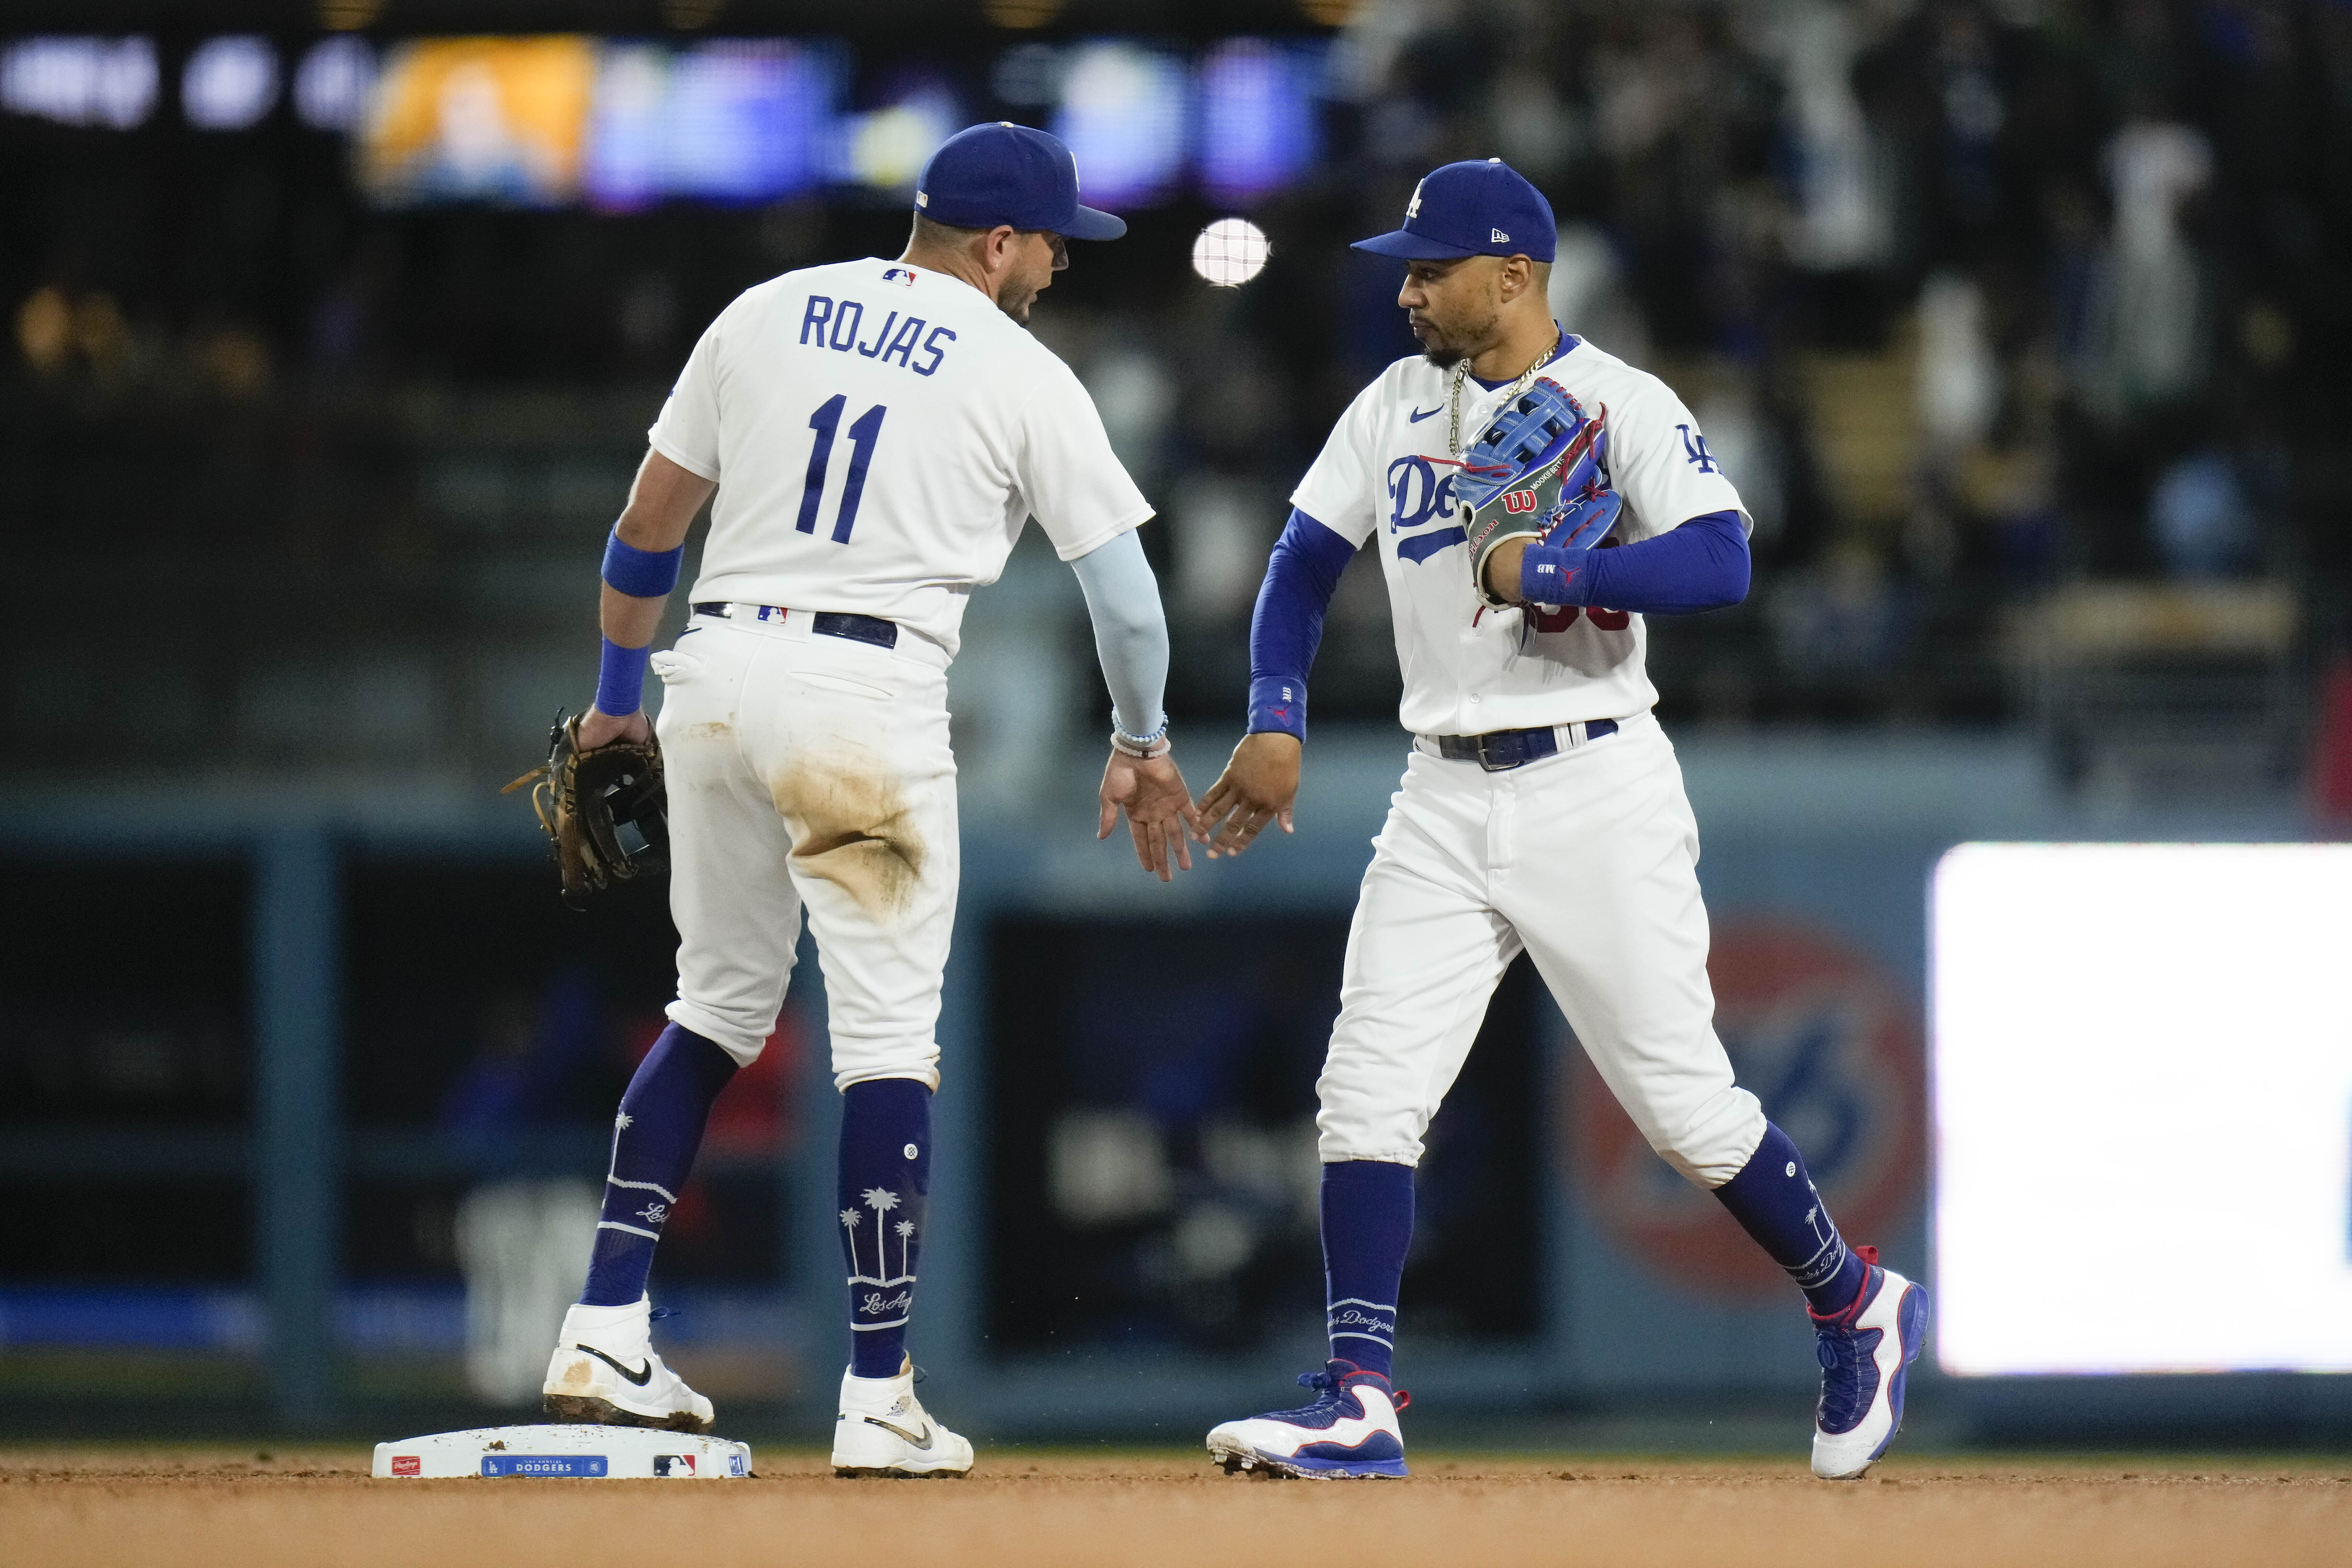 Miguel Rojas pushes to be the complete player the Dodgers need